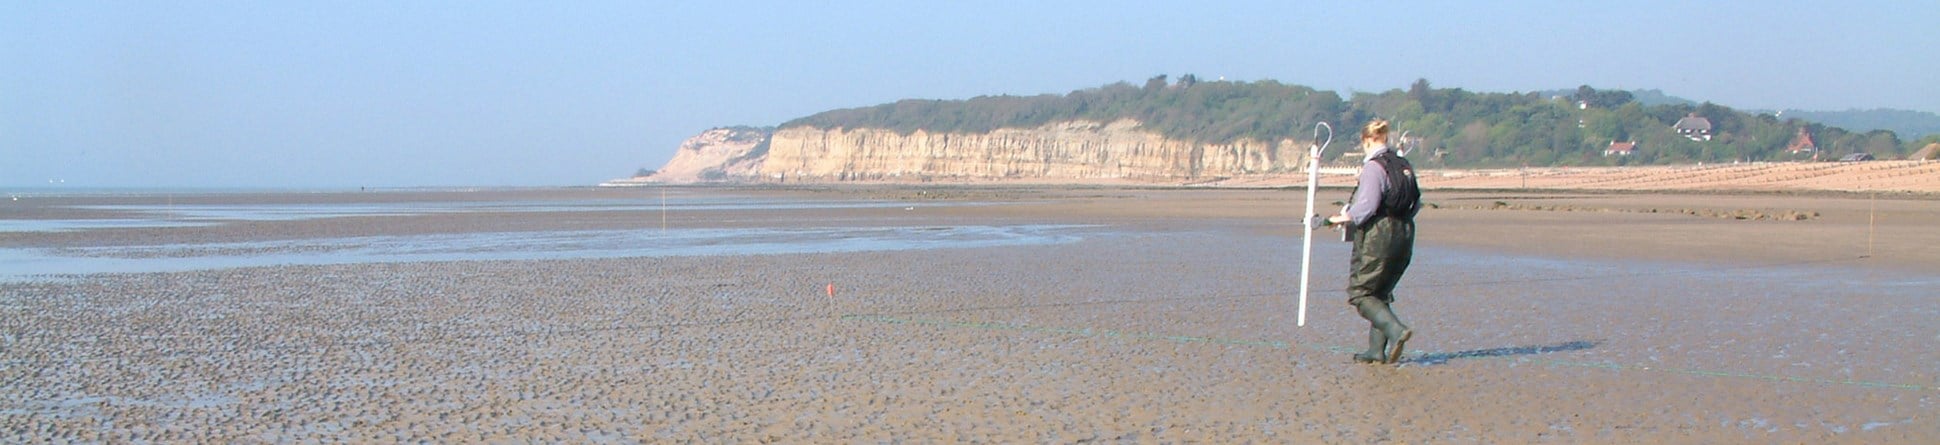 Colour photograph showing a woman in waders walking with a metal frame across a beach with low cliffs in the background